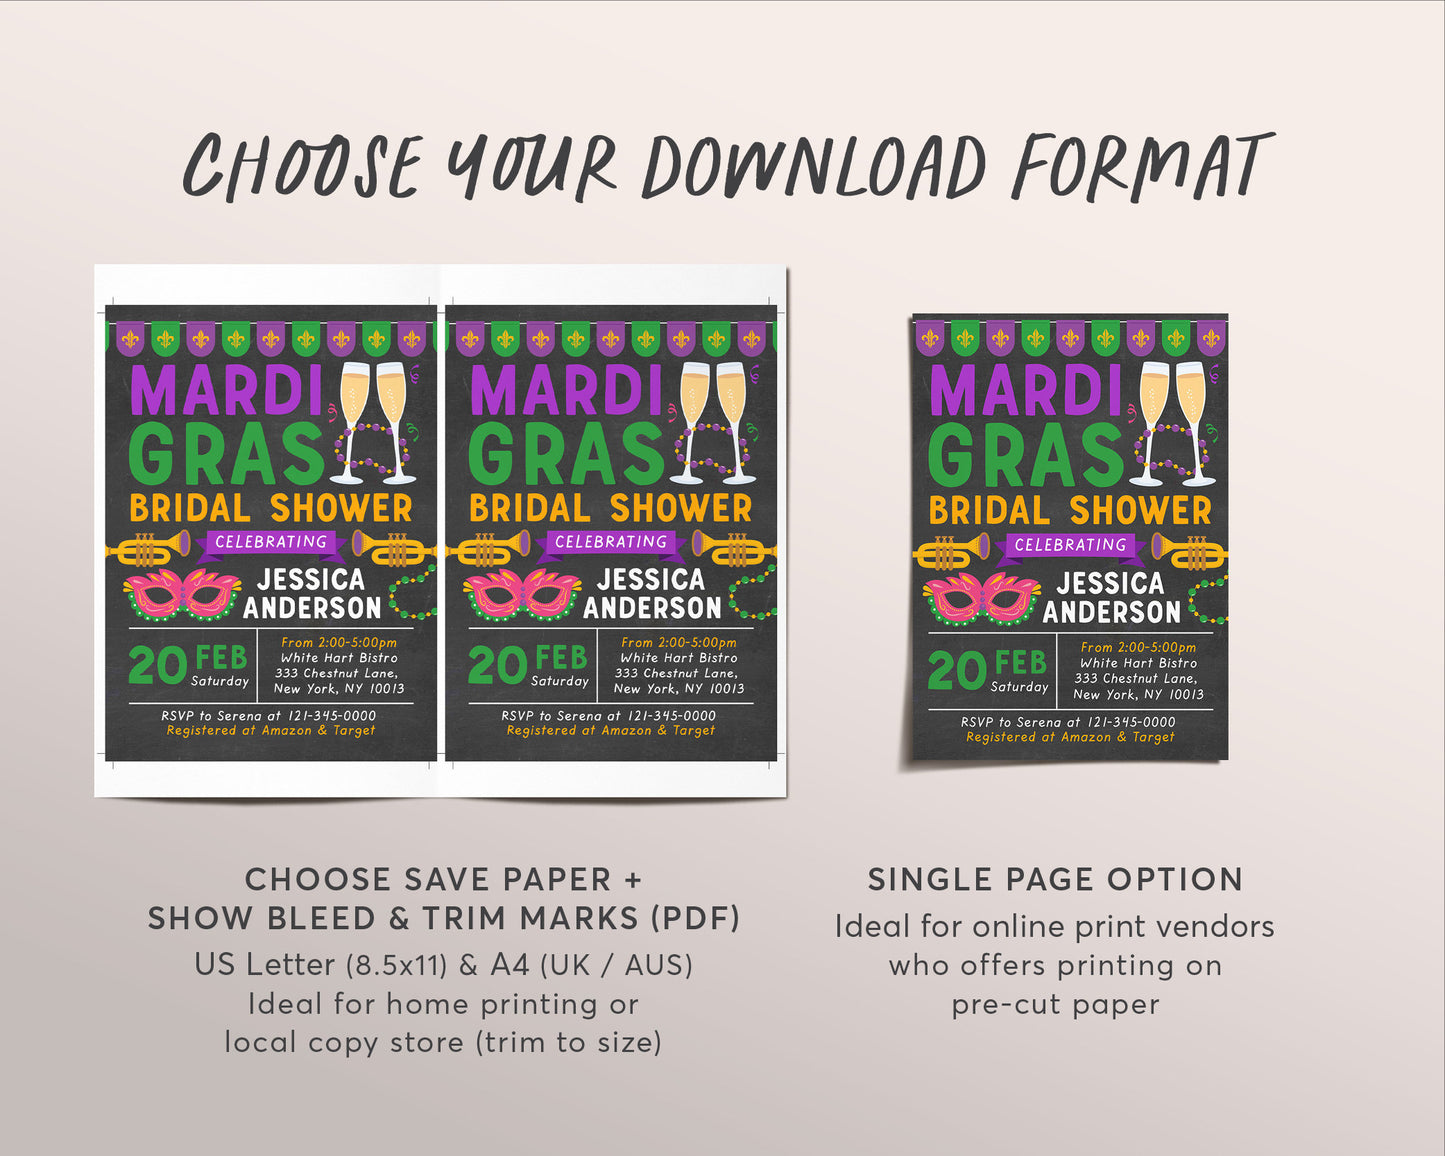 Mardi Gras Bridal Shower Invitation Editable Template, Miss to Mrs Couples Shower Wedding Invite Evite, Fat Tuesday Engagement Party